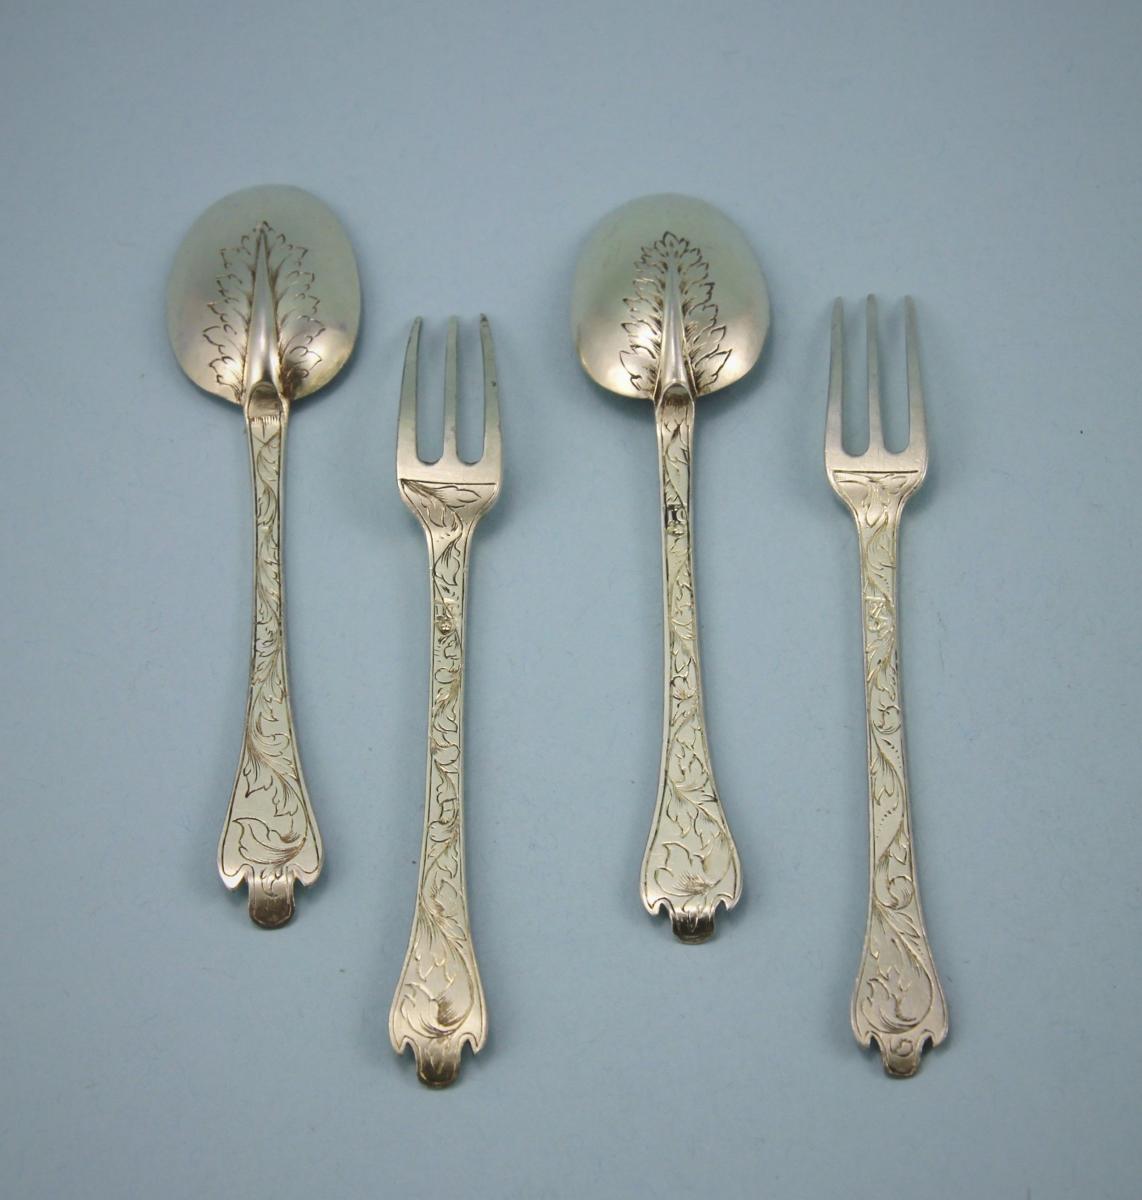 JAMES II Set of 2 Small Silver Gilt Chased Trefid Forks and Spoons. London circa 1685